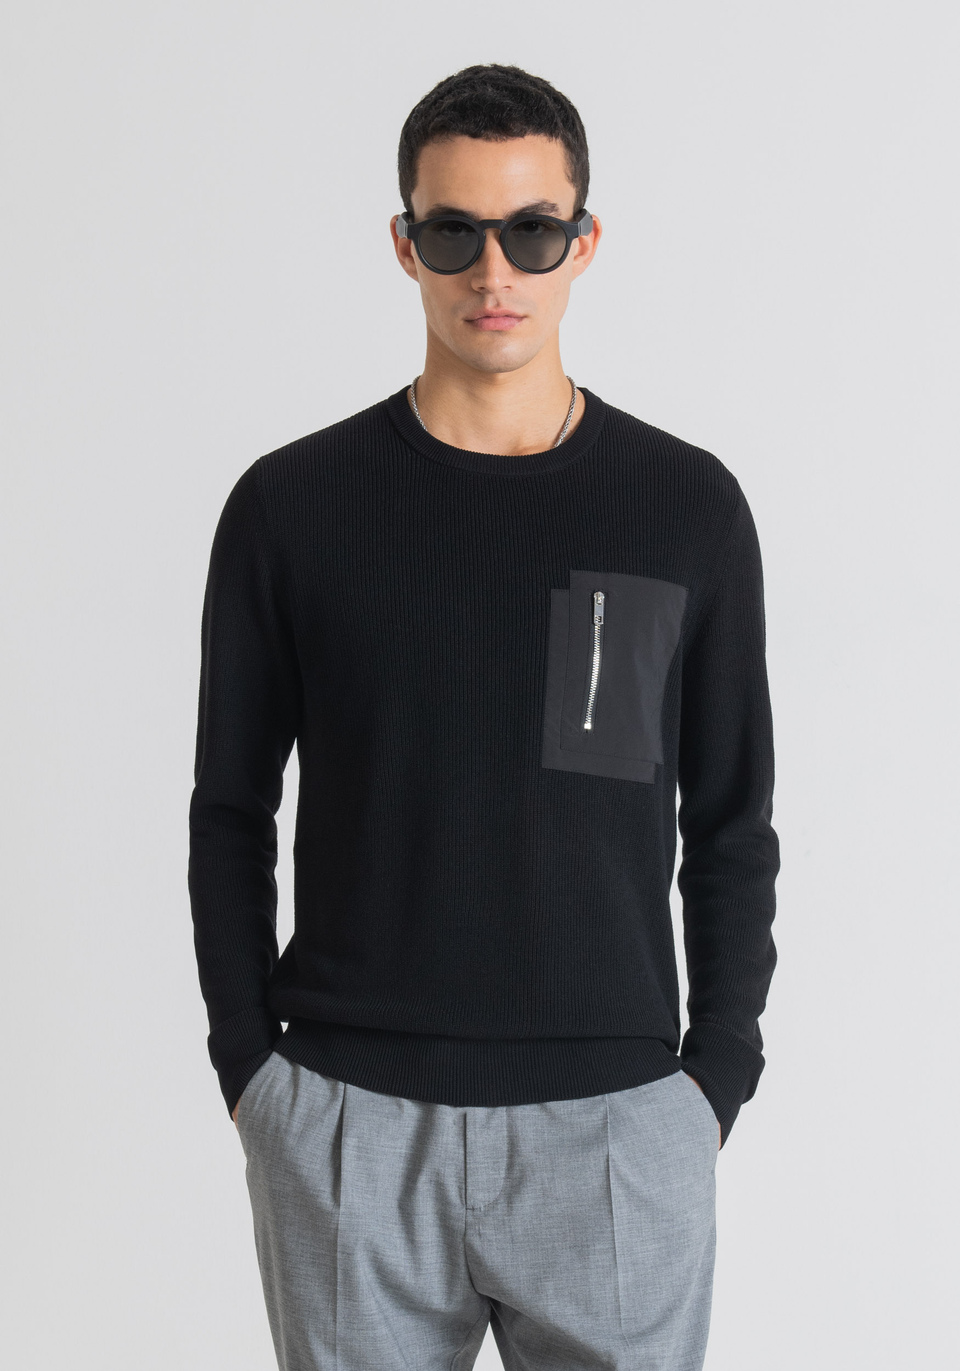 SLIM FIT SWEATER IN COTTON BLEND YARN WITH CONTRASTING POCKET - Antony Morato Online Shop